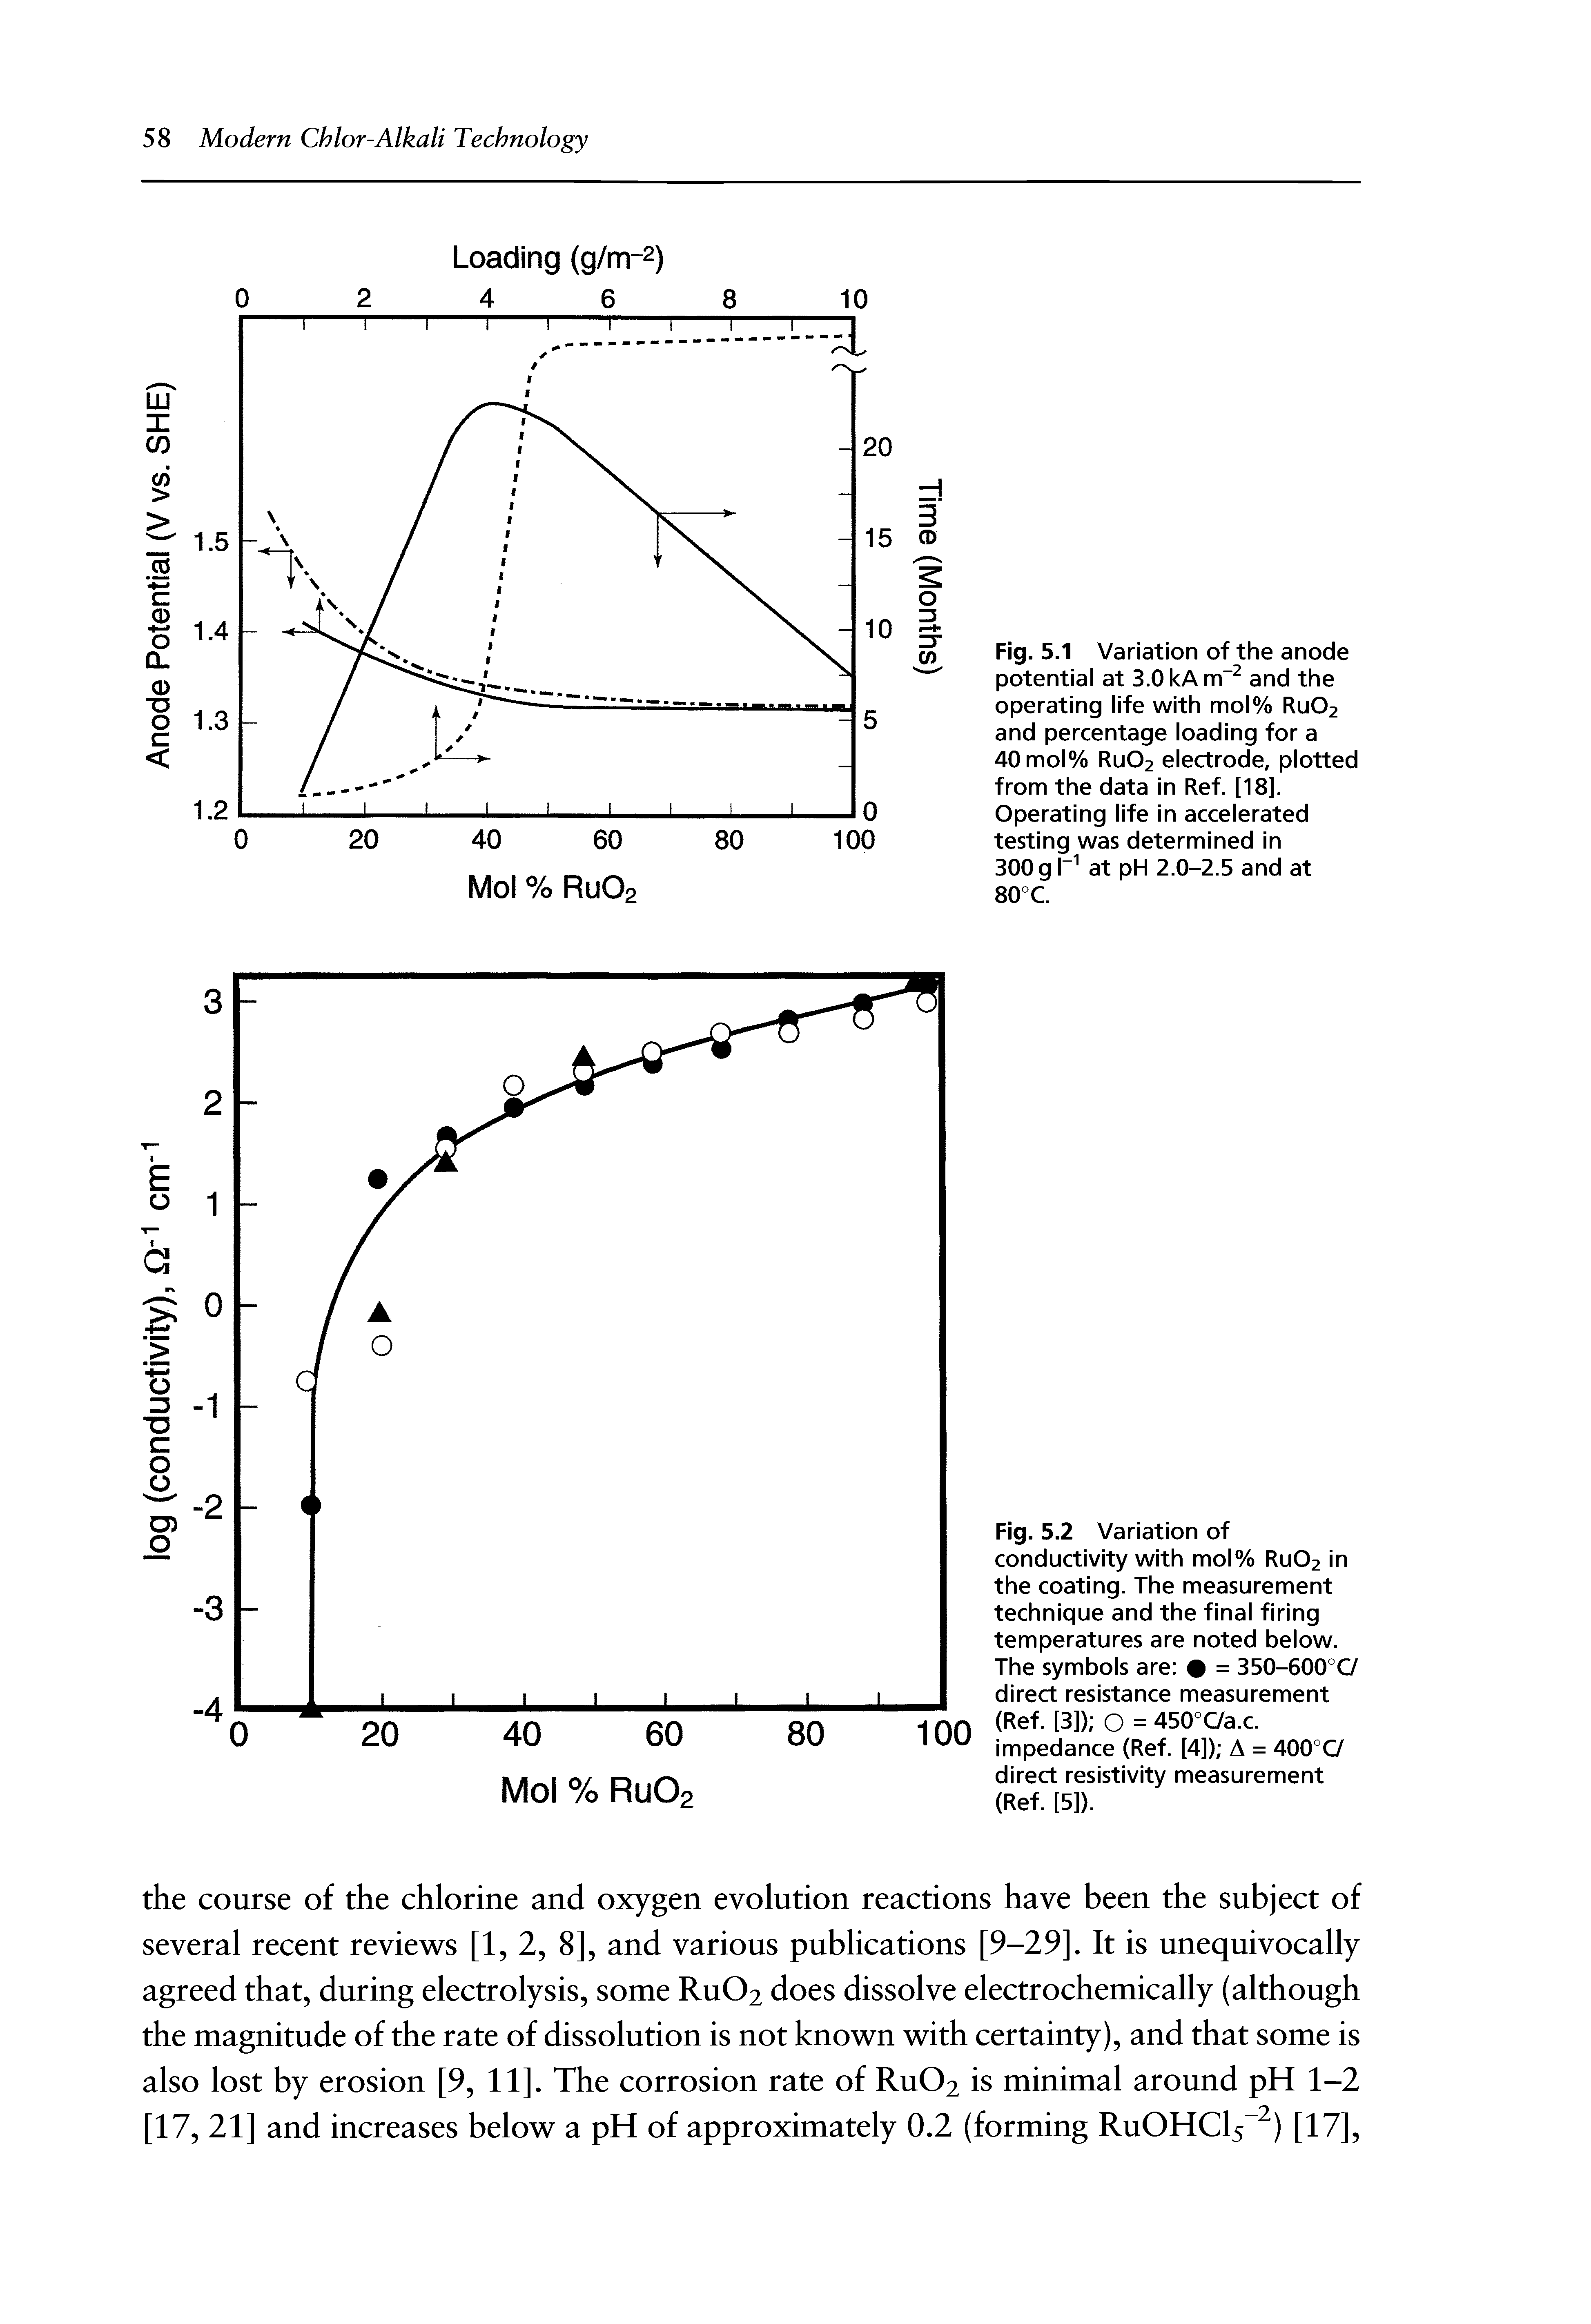 Fig. 5.2 Variation of conductivity with mol% Ru02 in the coating. The measurement technique and the final firing temperatures are noted below. The symbols are = 350-600°C/ direct resistance measurement (Ref. [3]) O = 450°C/a.c. impedance (Ref. [4]) A = 400°C/ direct resistivity measurement (Ref. [5]).